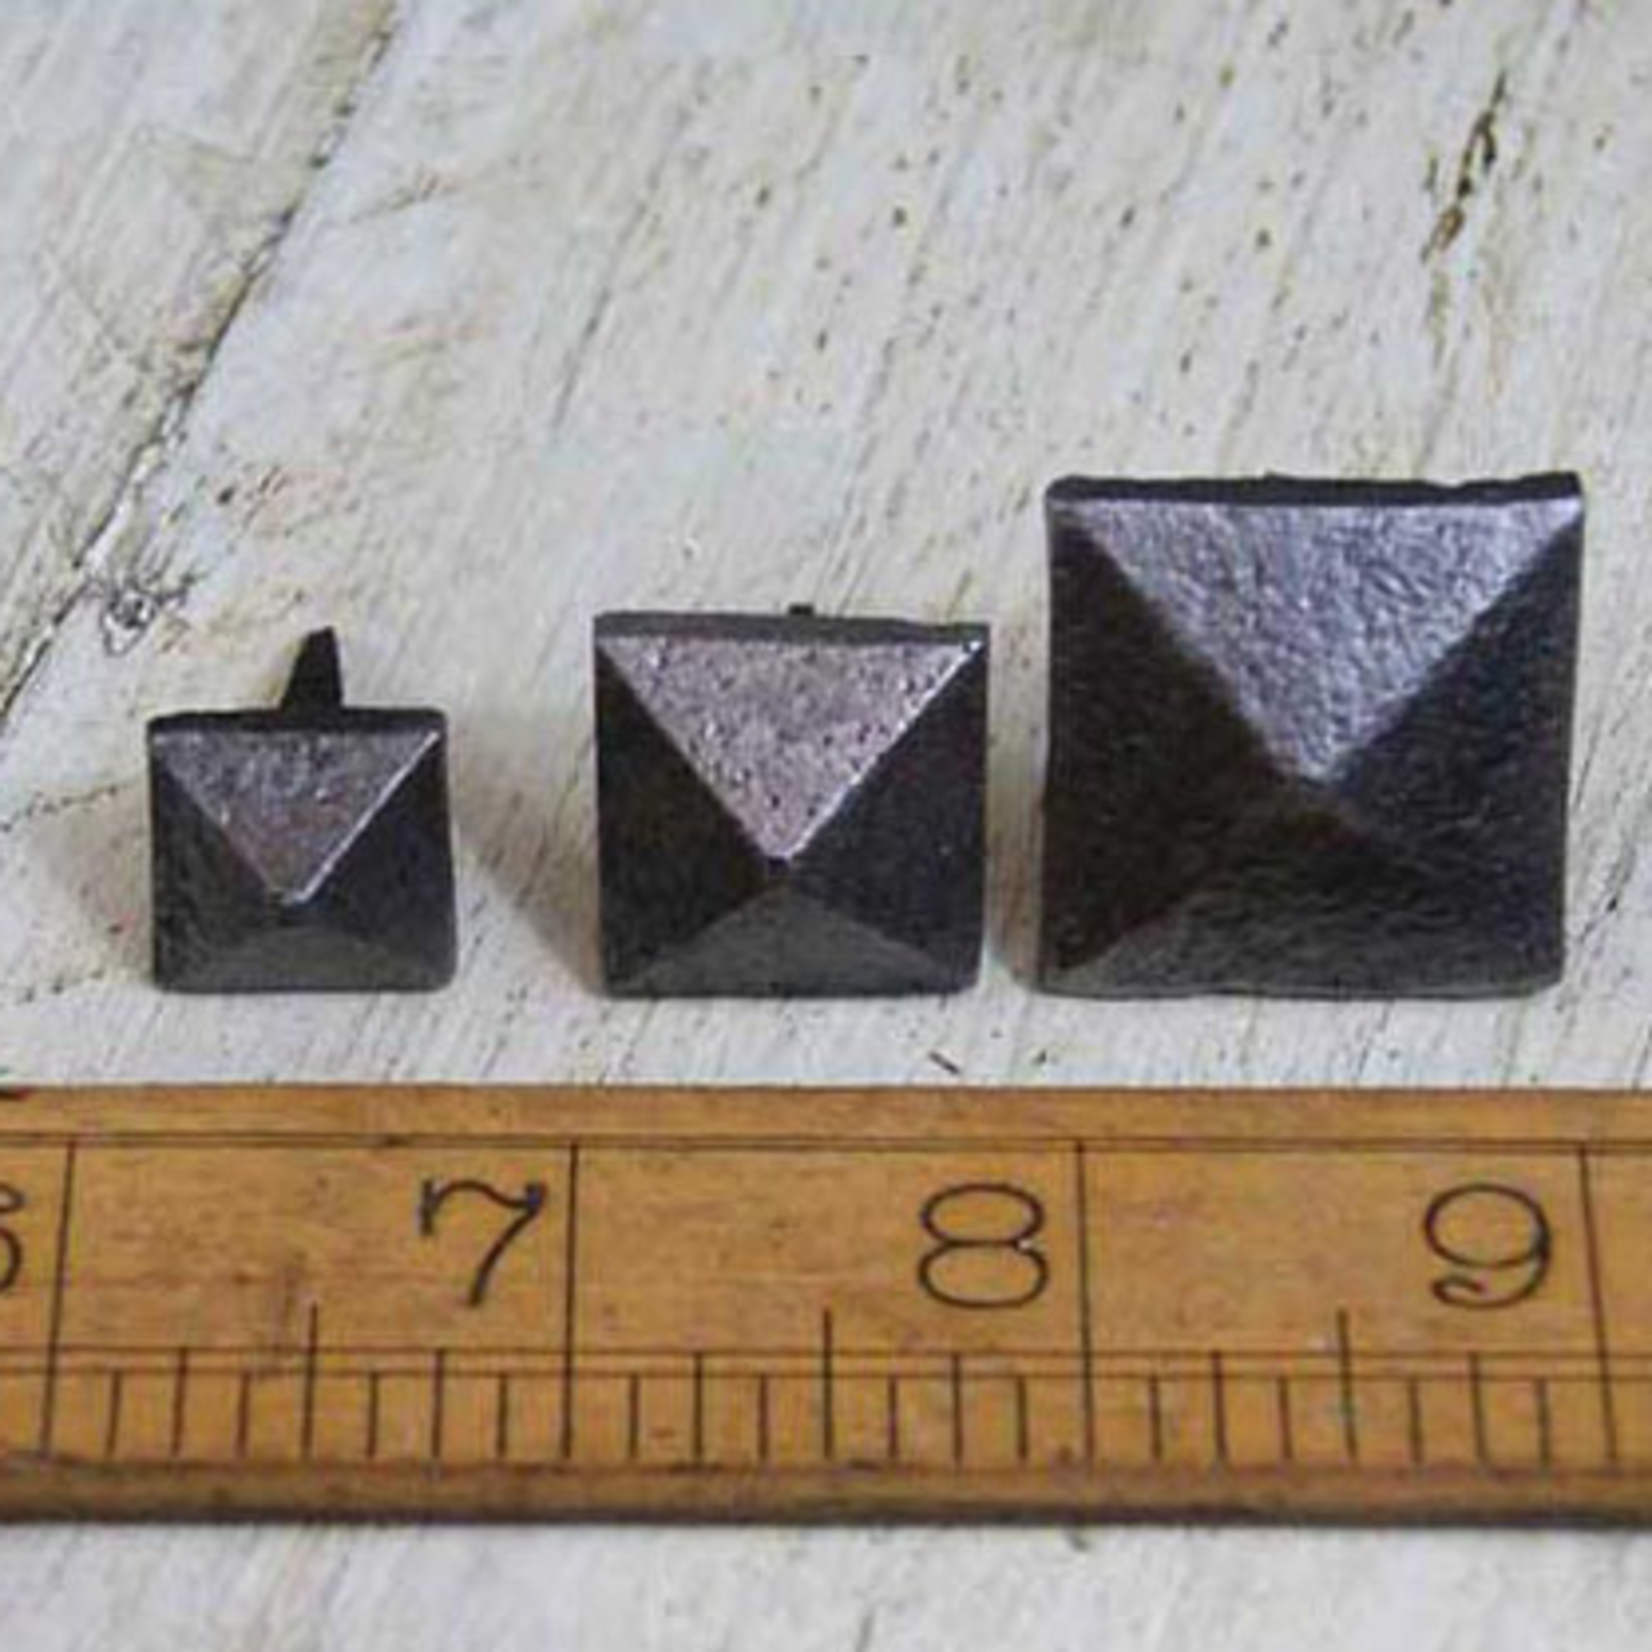 IRON RANGE Cast Iron Stud Square Pyramid Head 15mm Waxed Iron - used as a decorative door or wall stud